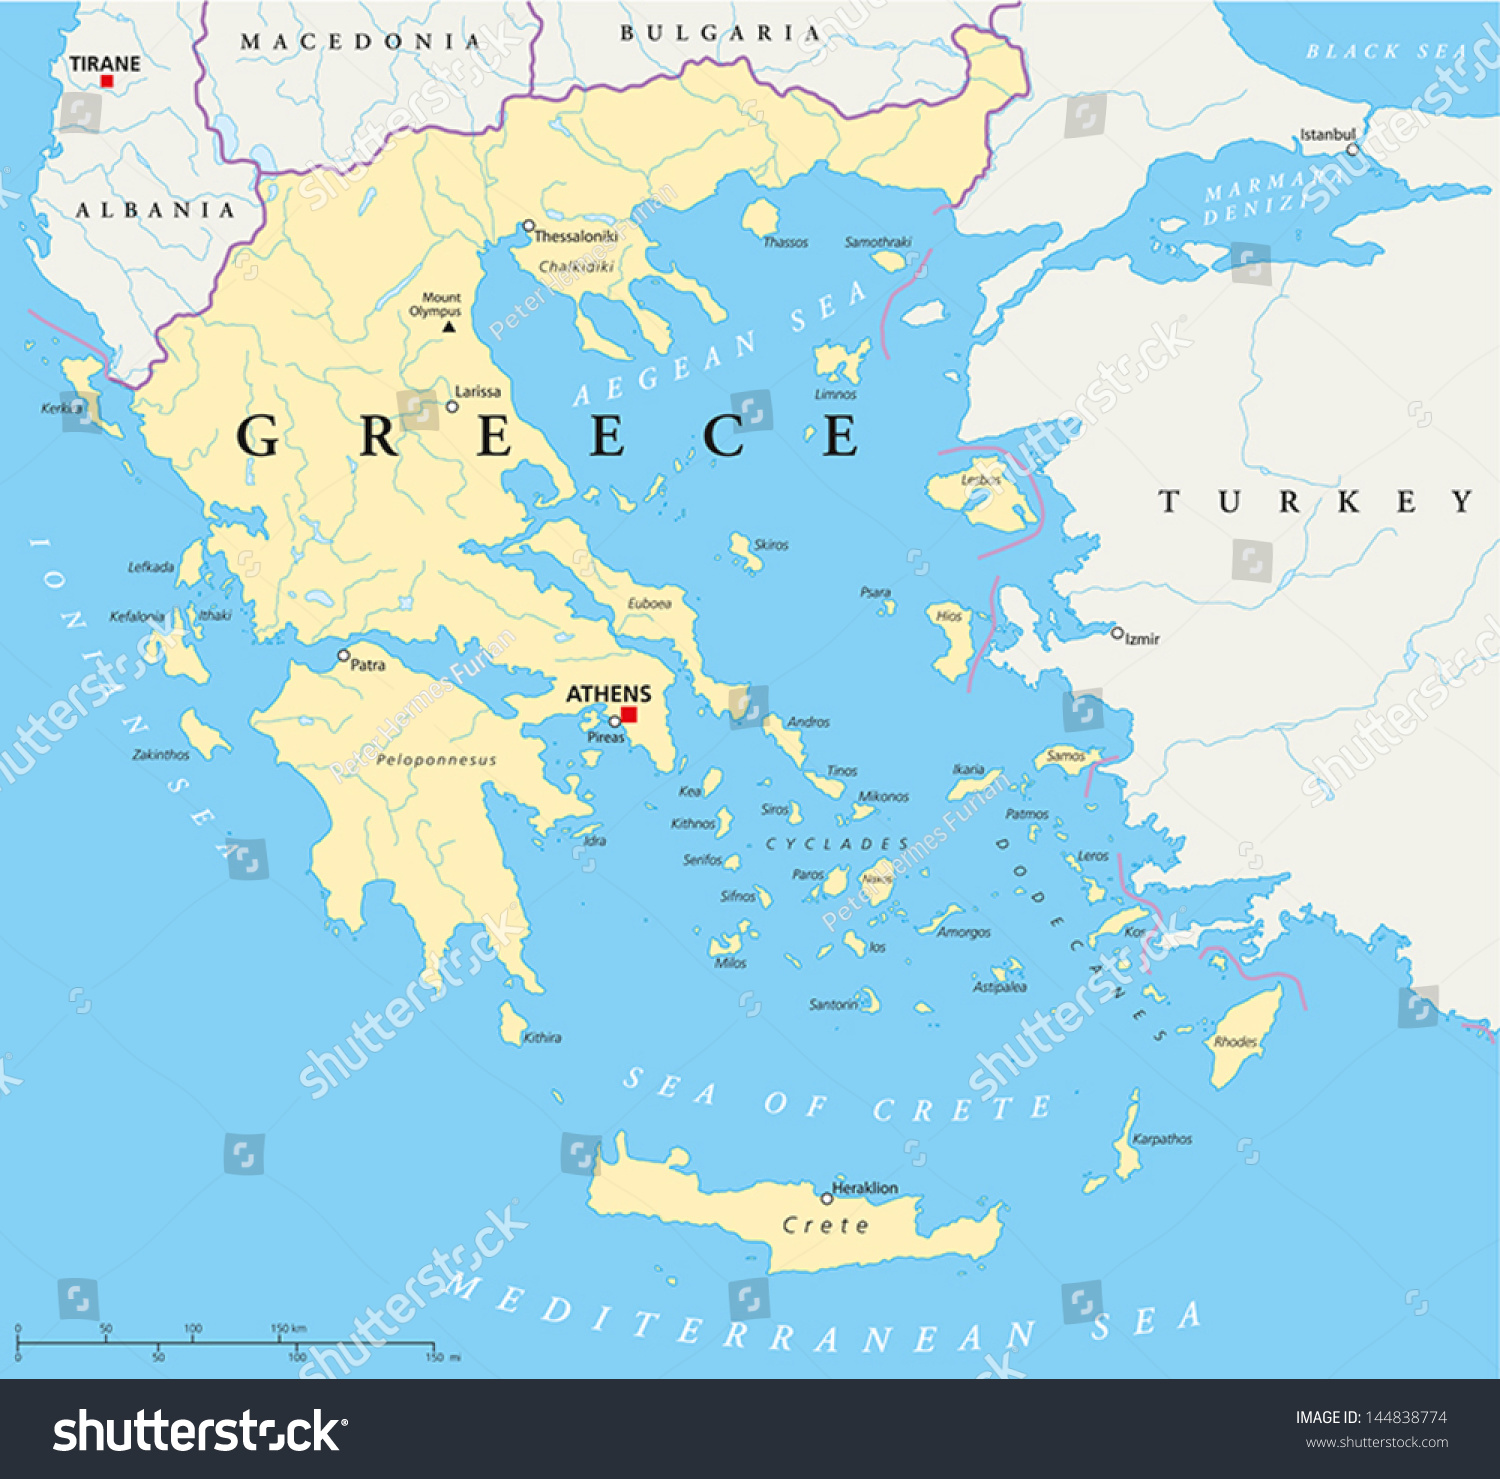 SVG of Greece Political Map. Hand drawn map of Greece with the capital Athens, national borders, most important cities, rivers and lakes. With english labeling and scale. svg